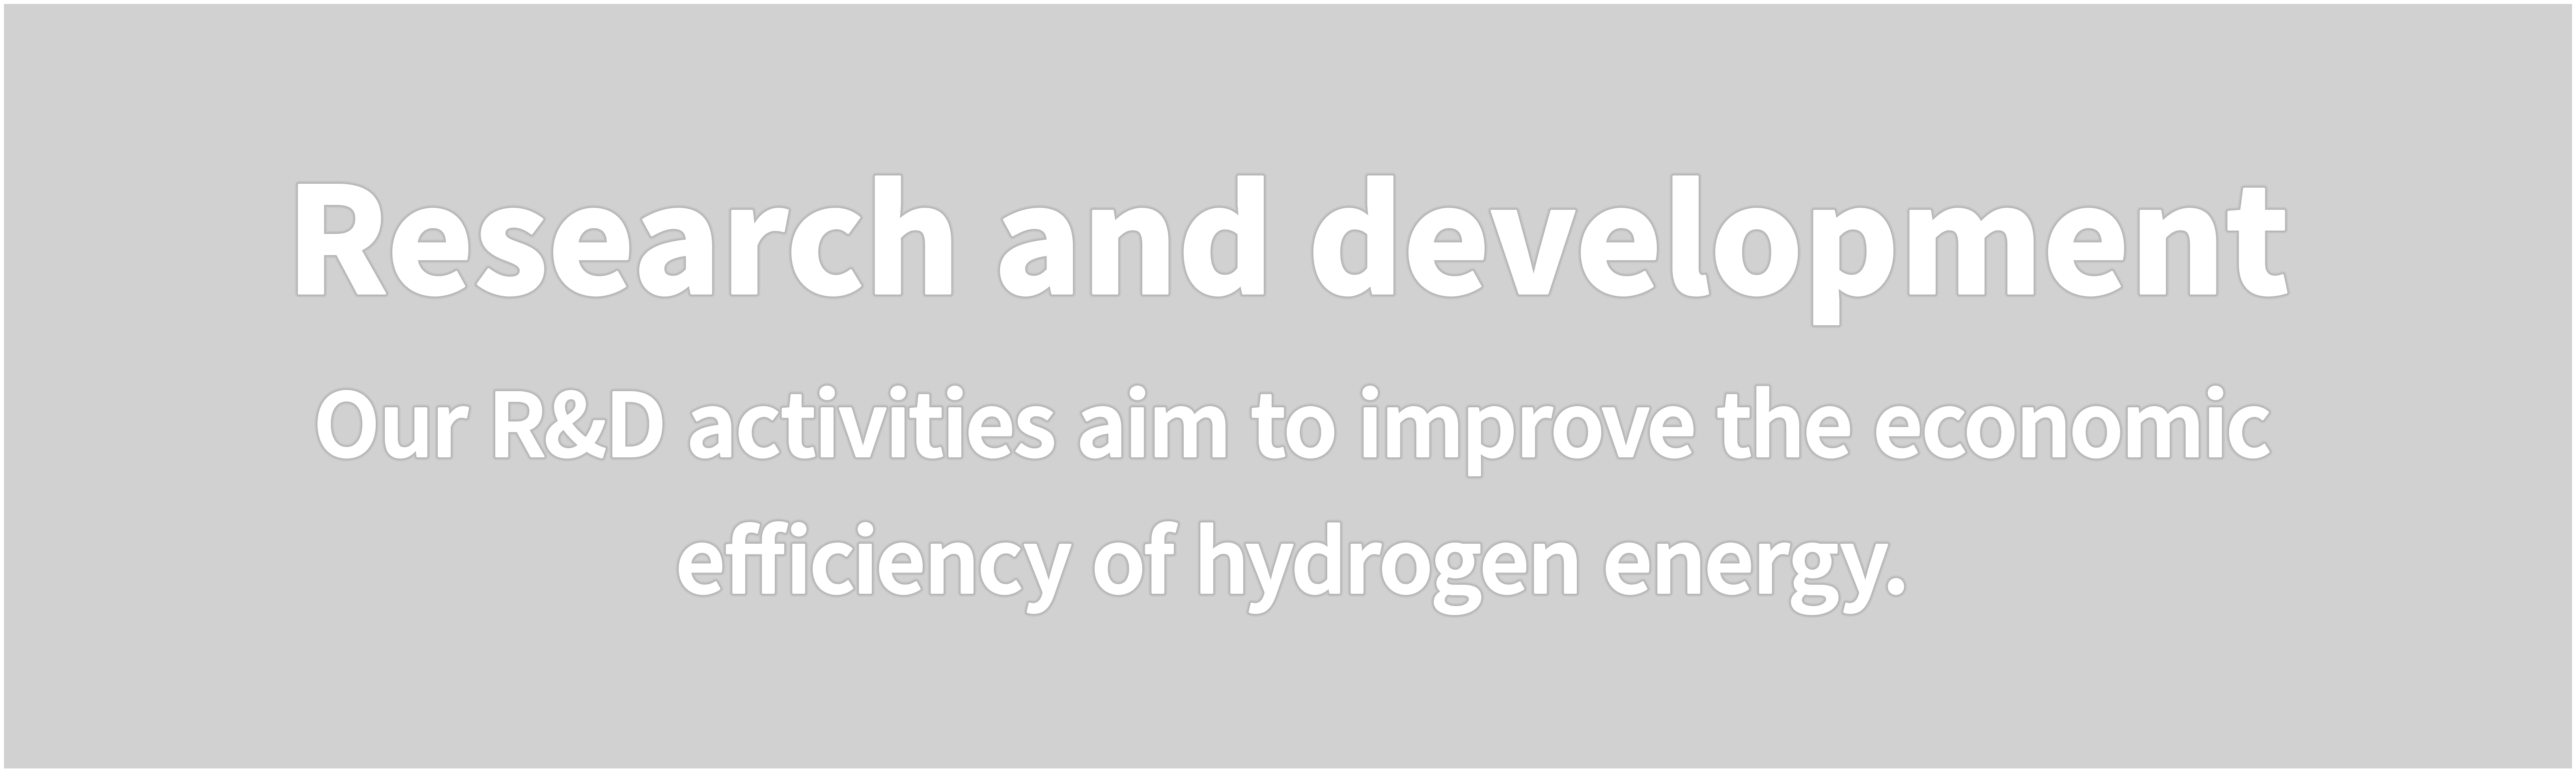 Research and development  Our R&D activities aim to improve the economic efficiency of hydrogen energy.